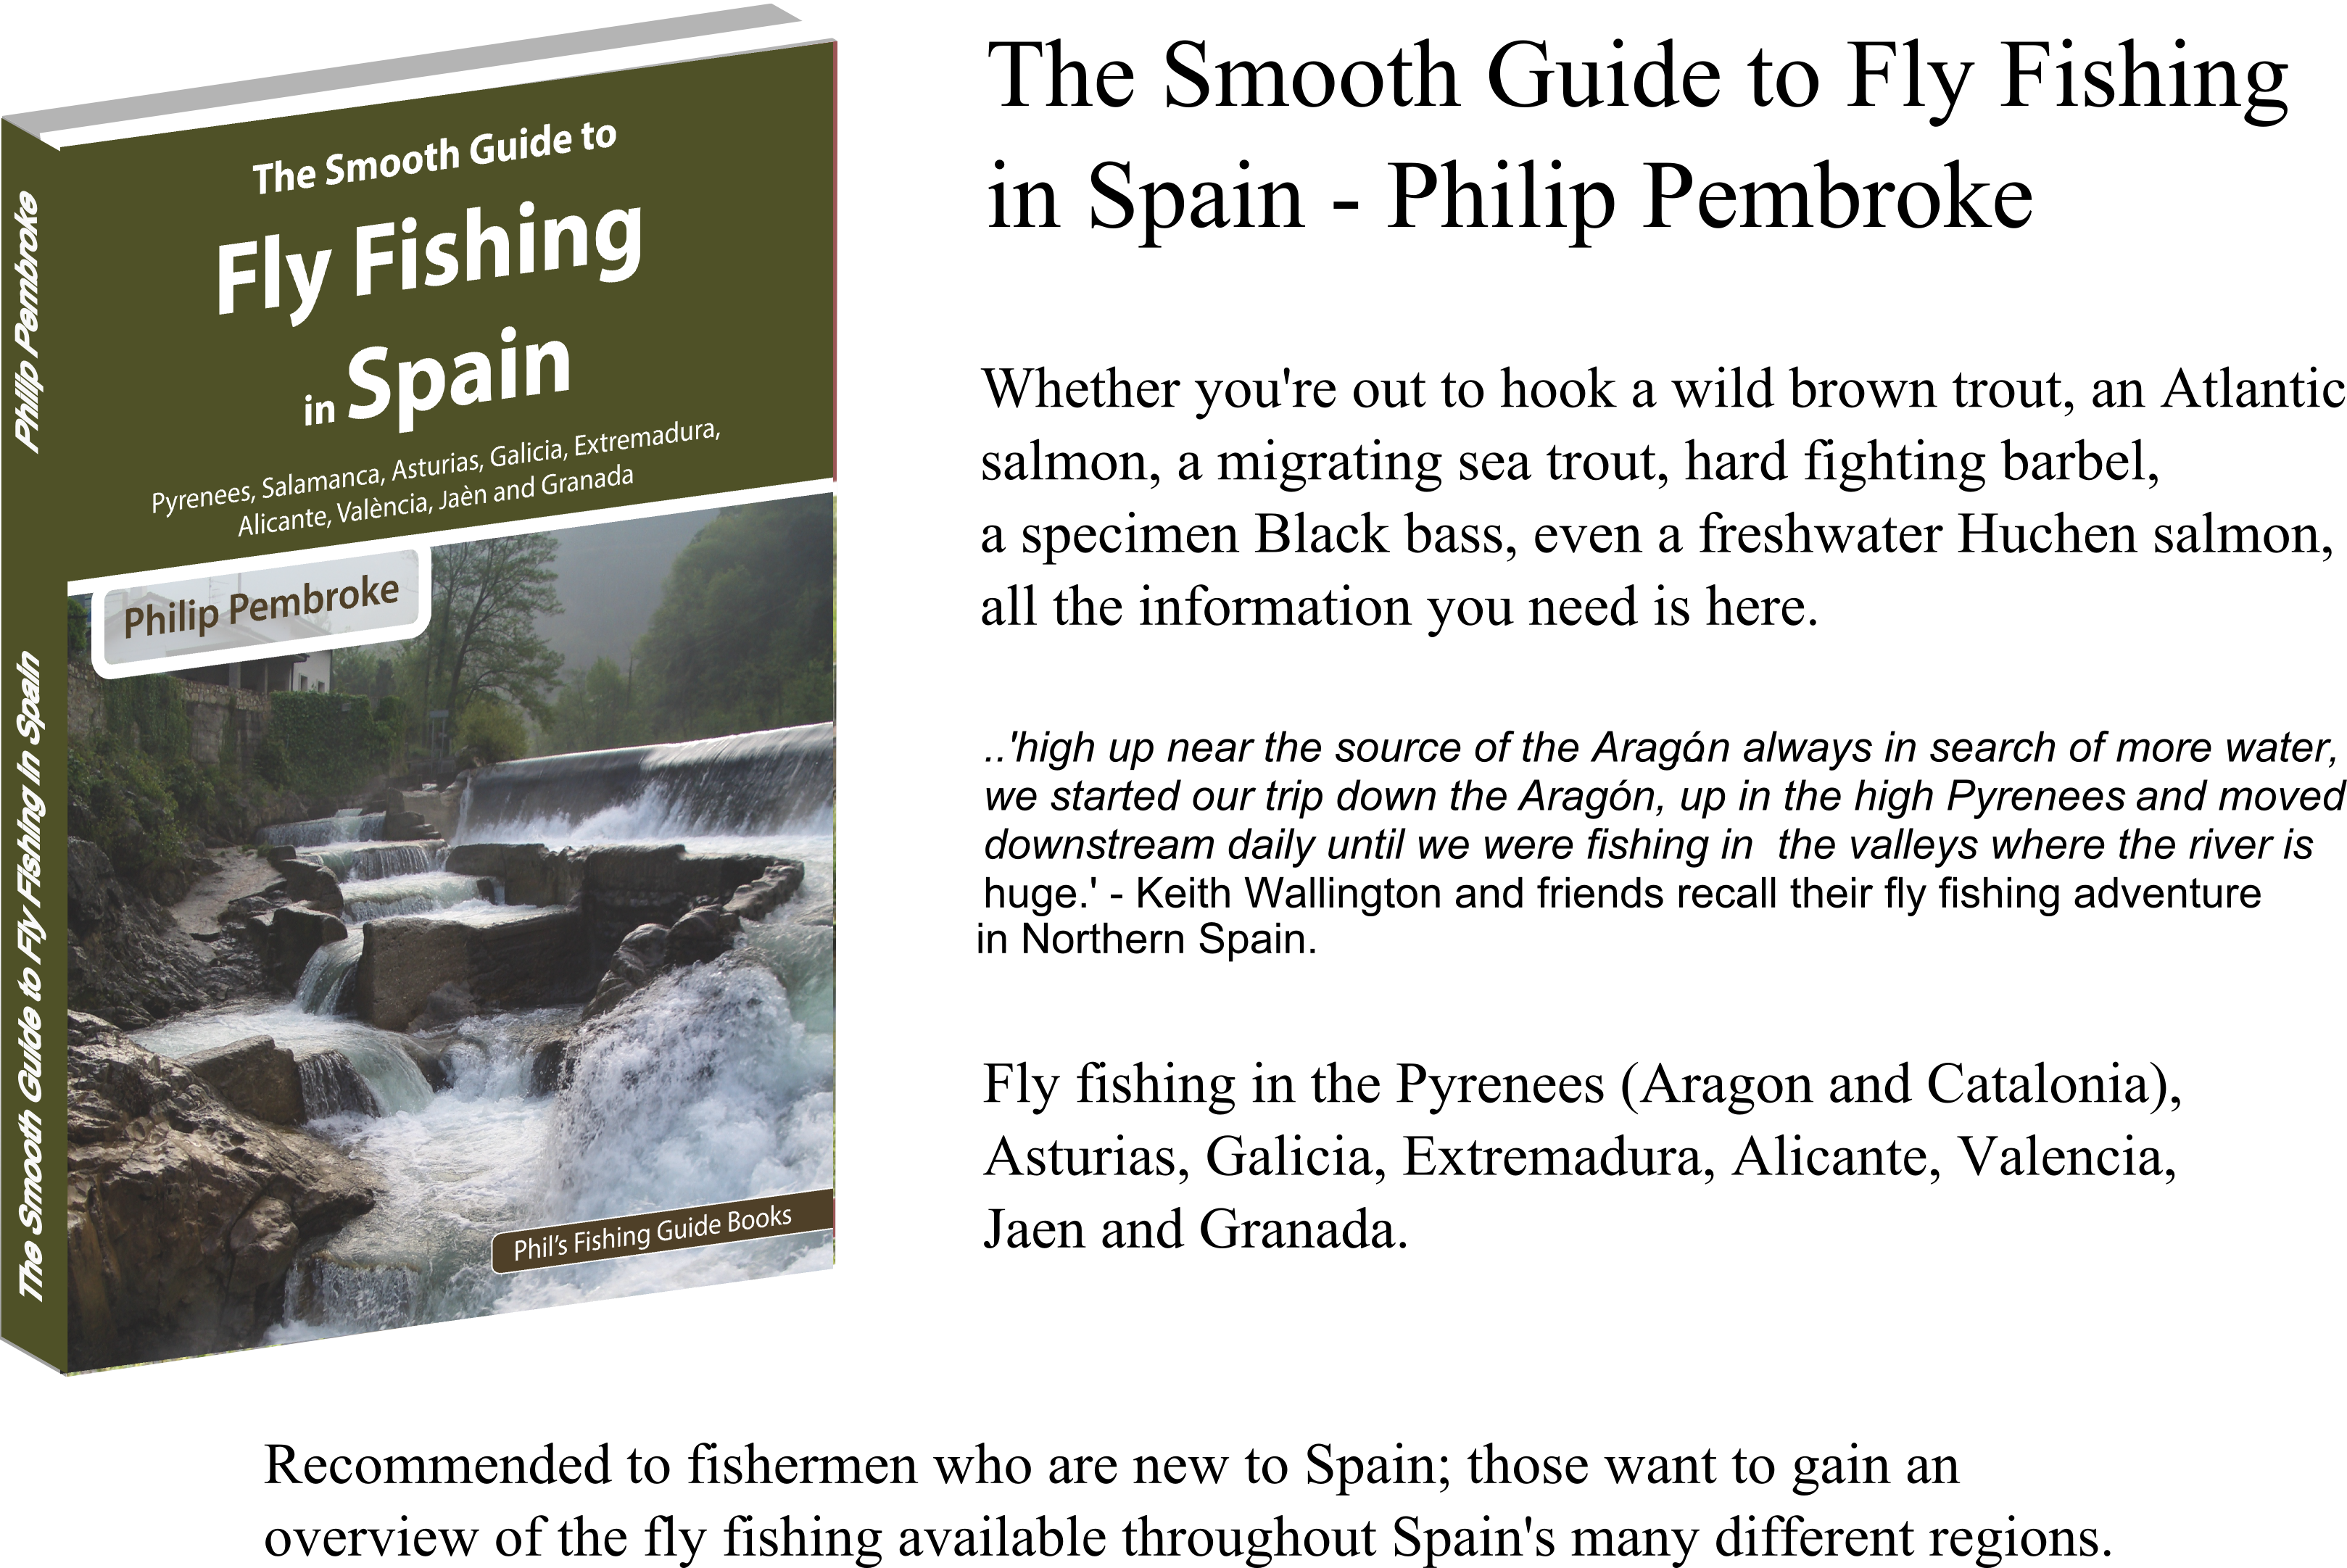 Books about fishing in Spain, France and Portugal - Fishing in